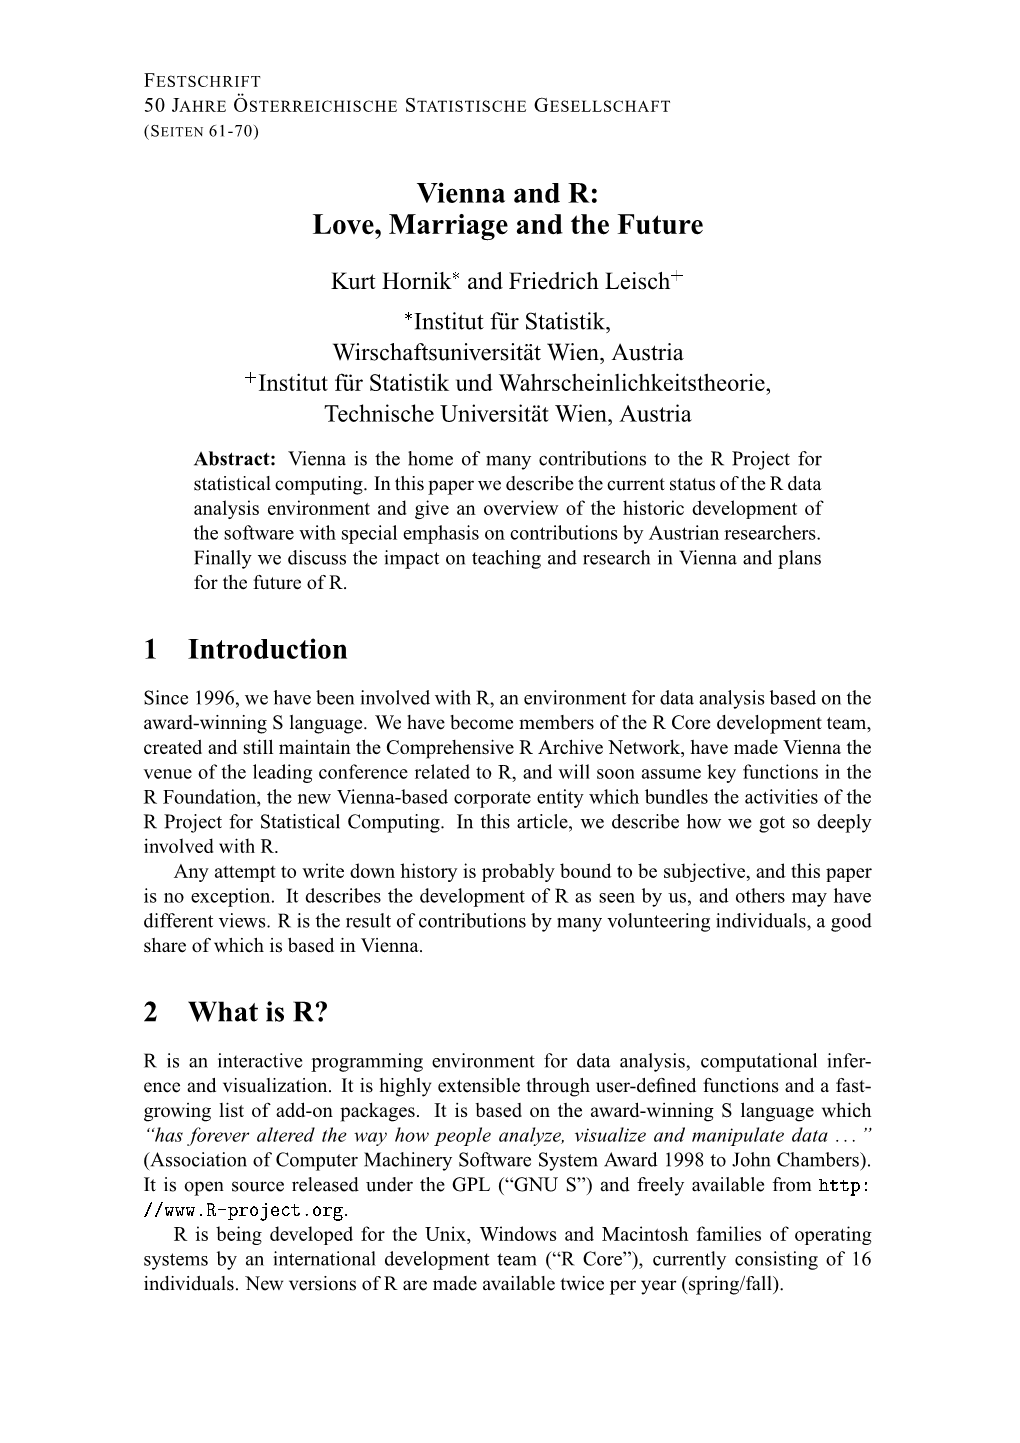 Vienna and R: Love, Marriage and the Future 1 Introduction 2 What Is R?